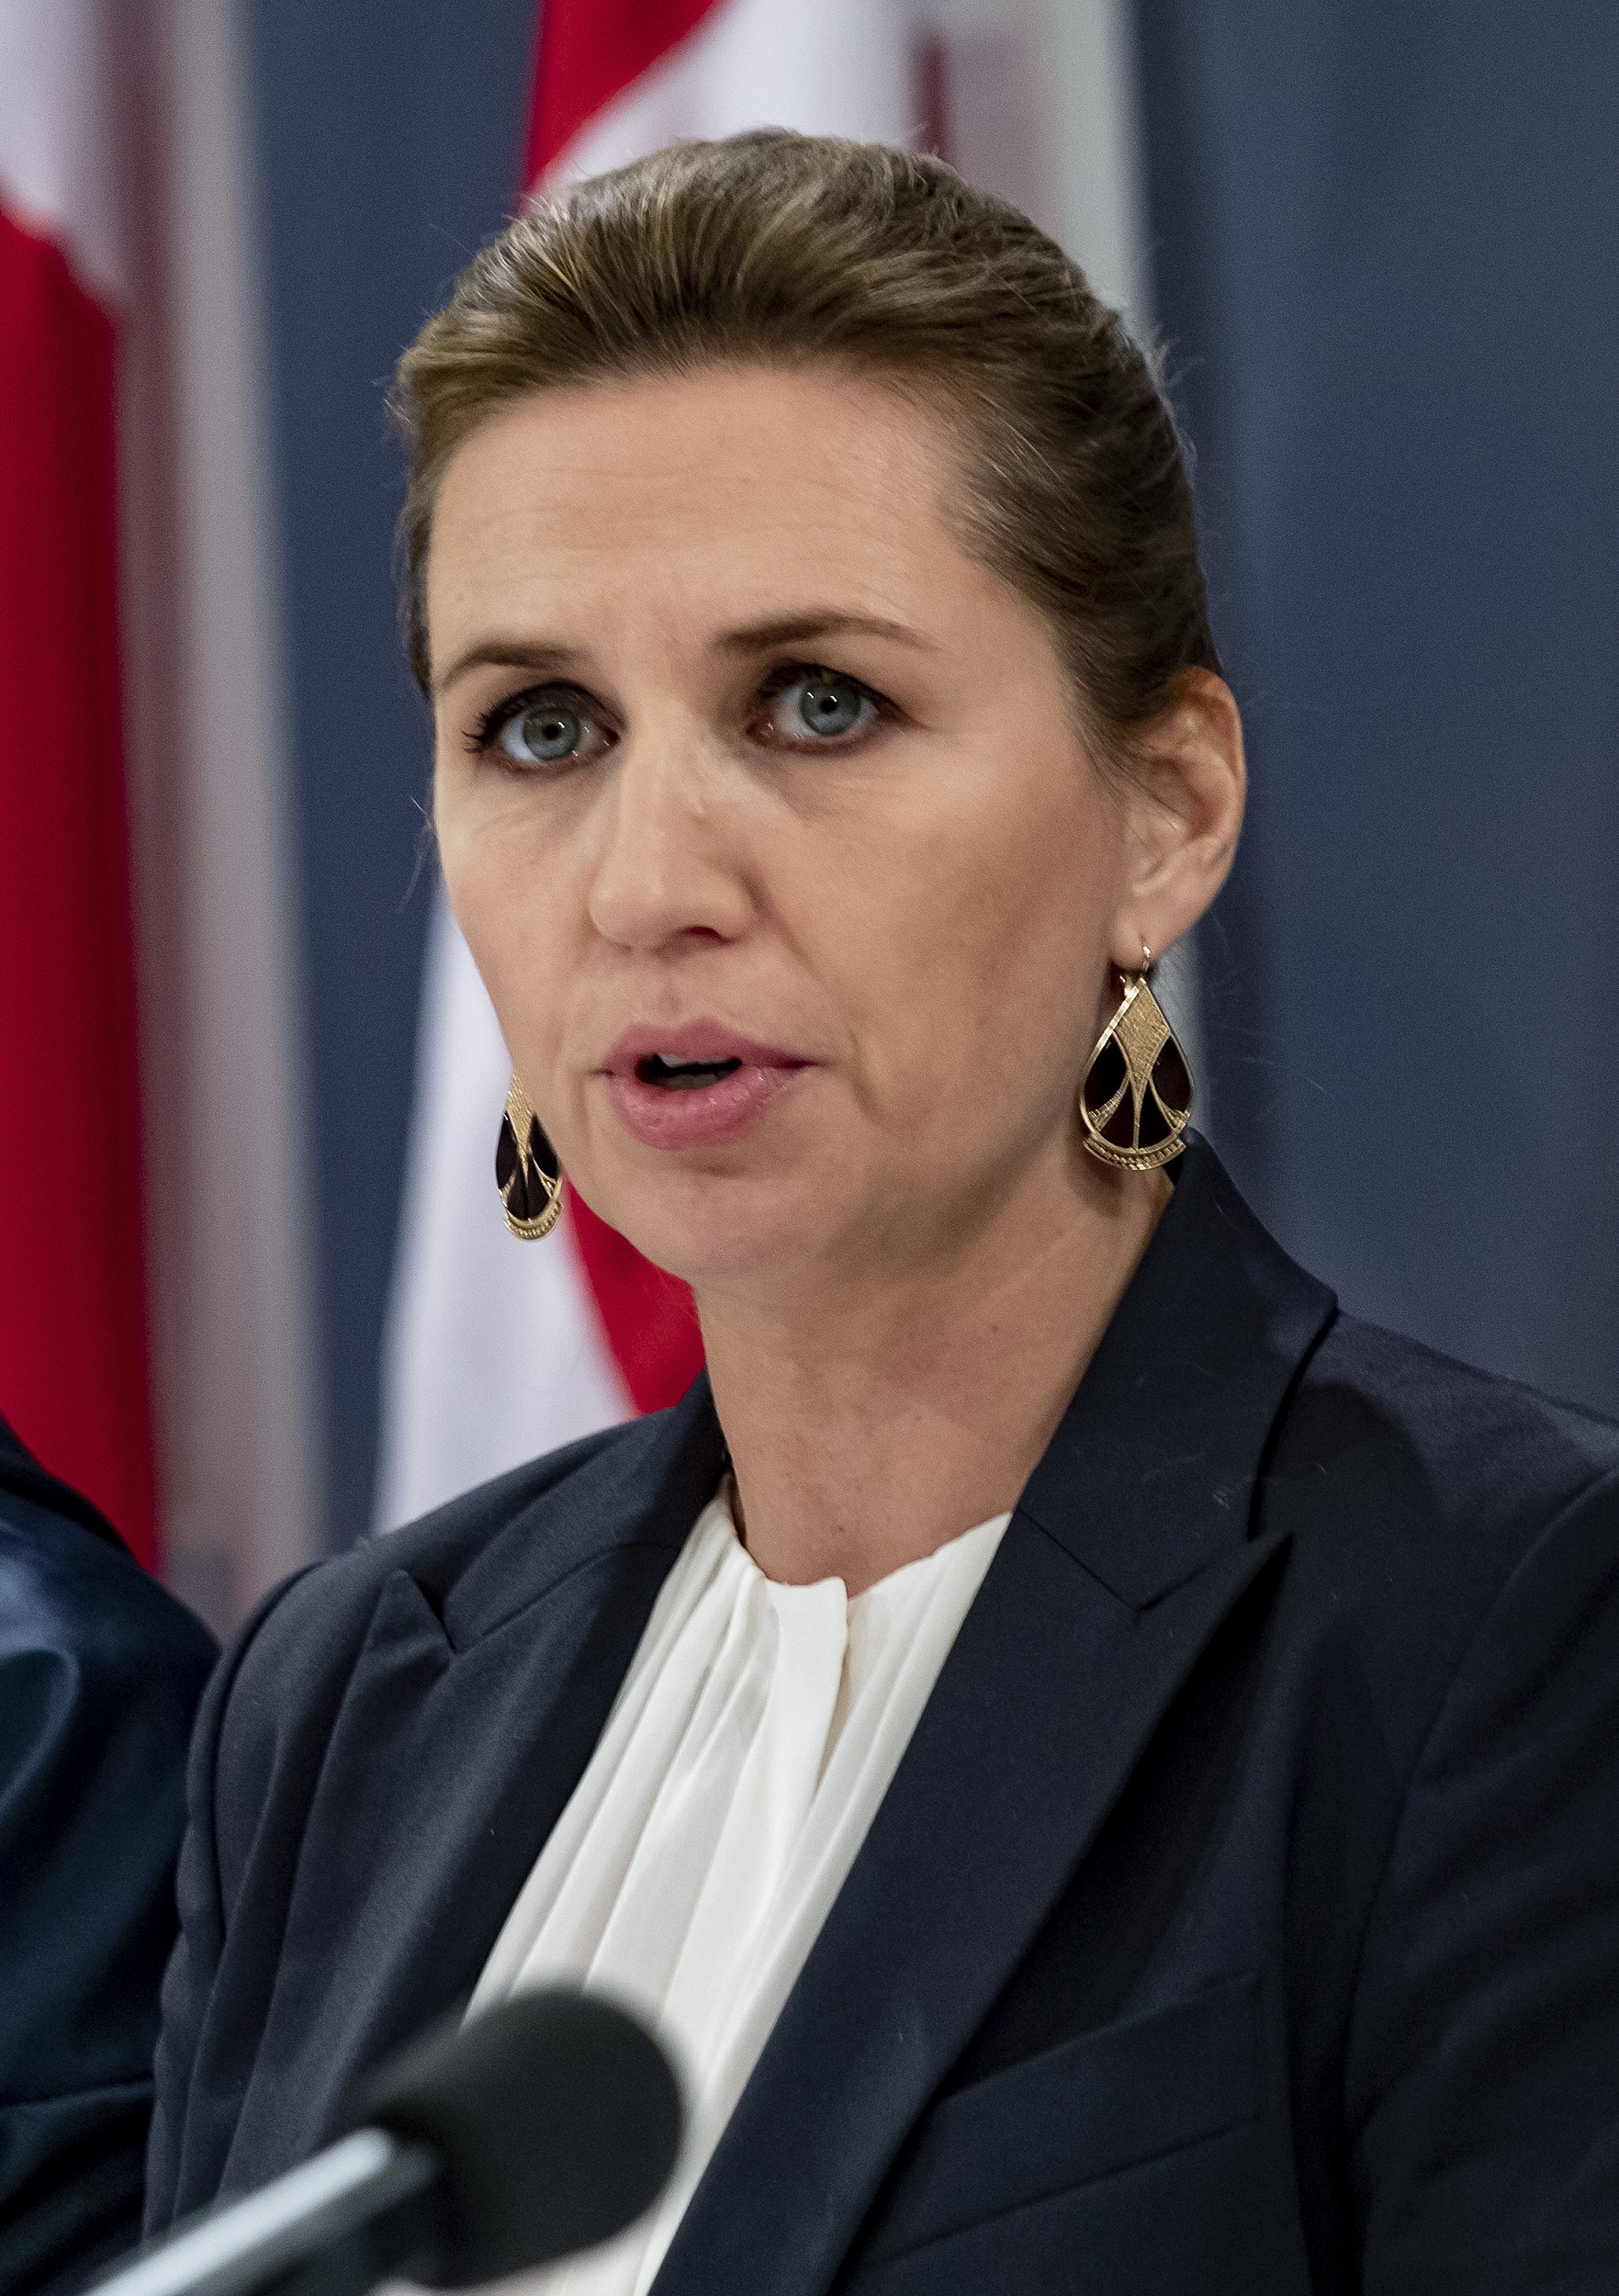 Danish PM Frederiksen says she is not a candidate to head NATO